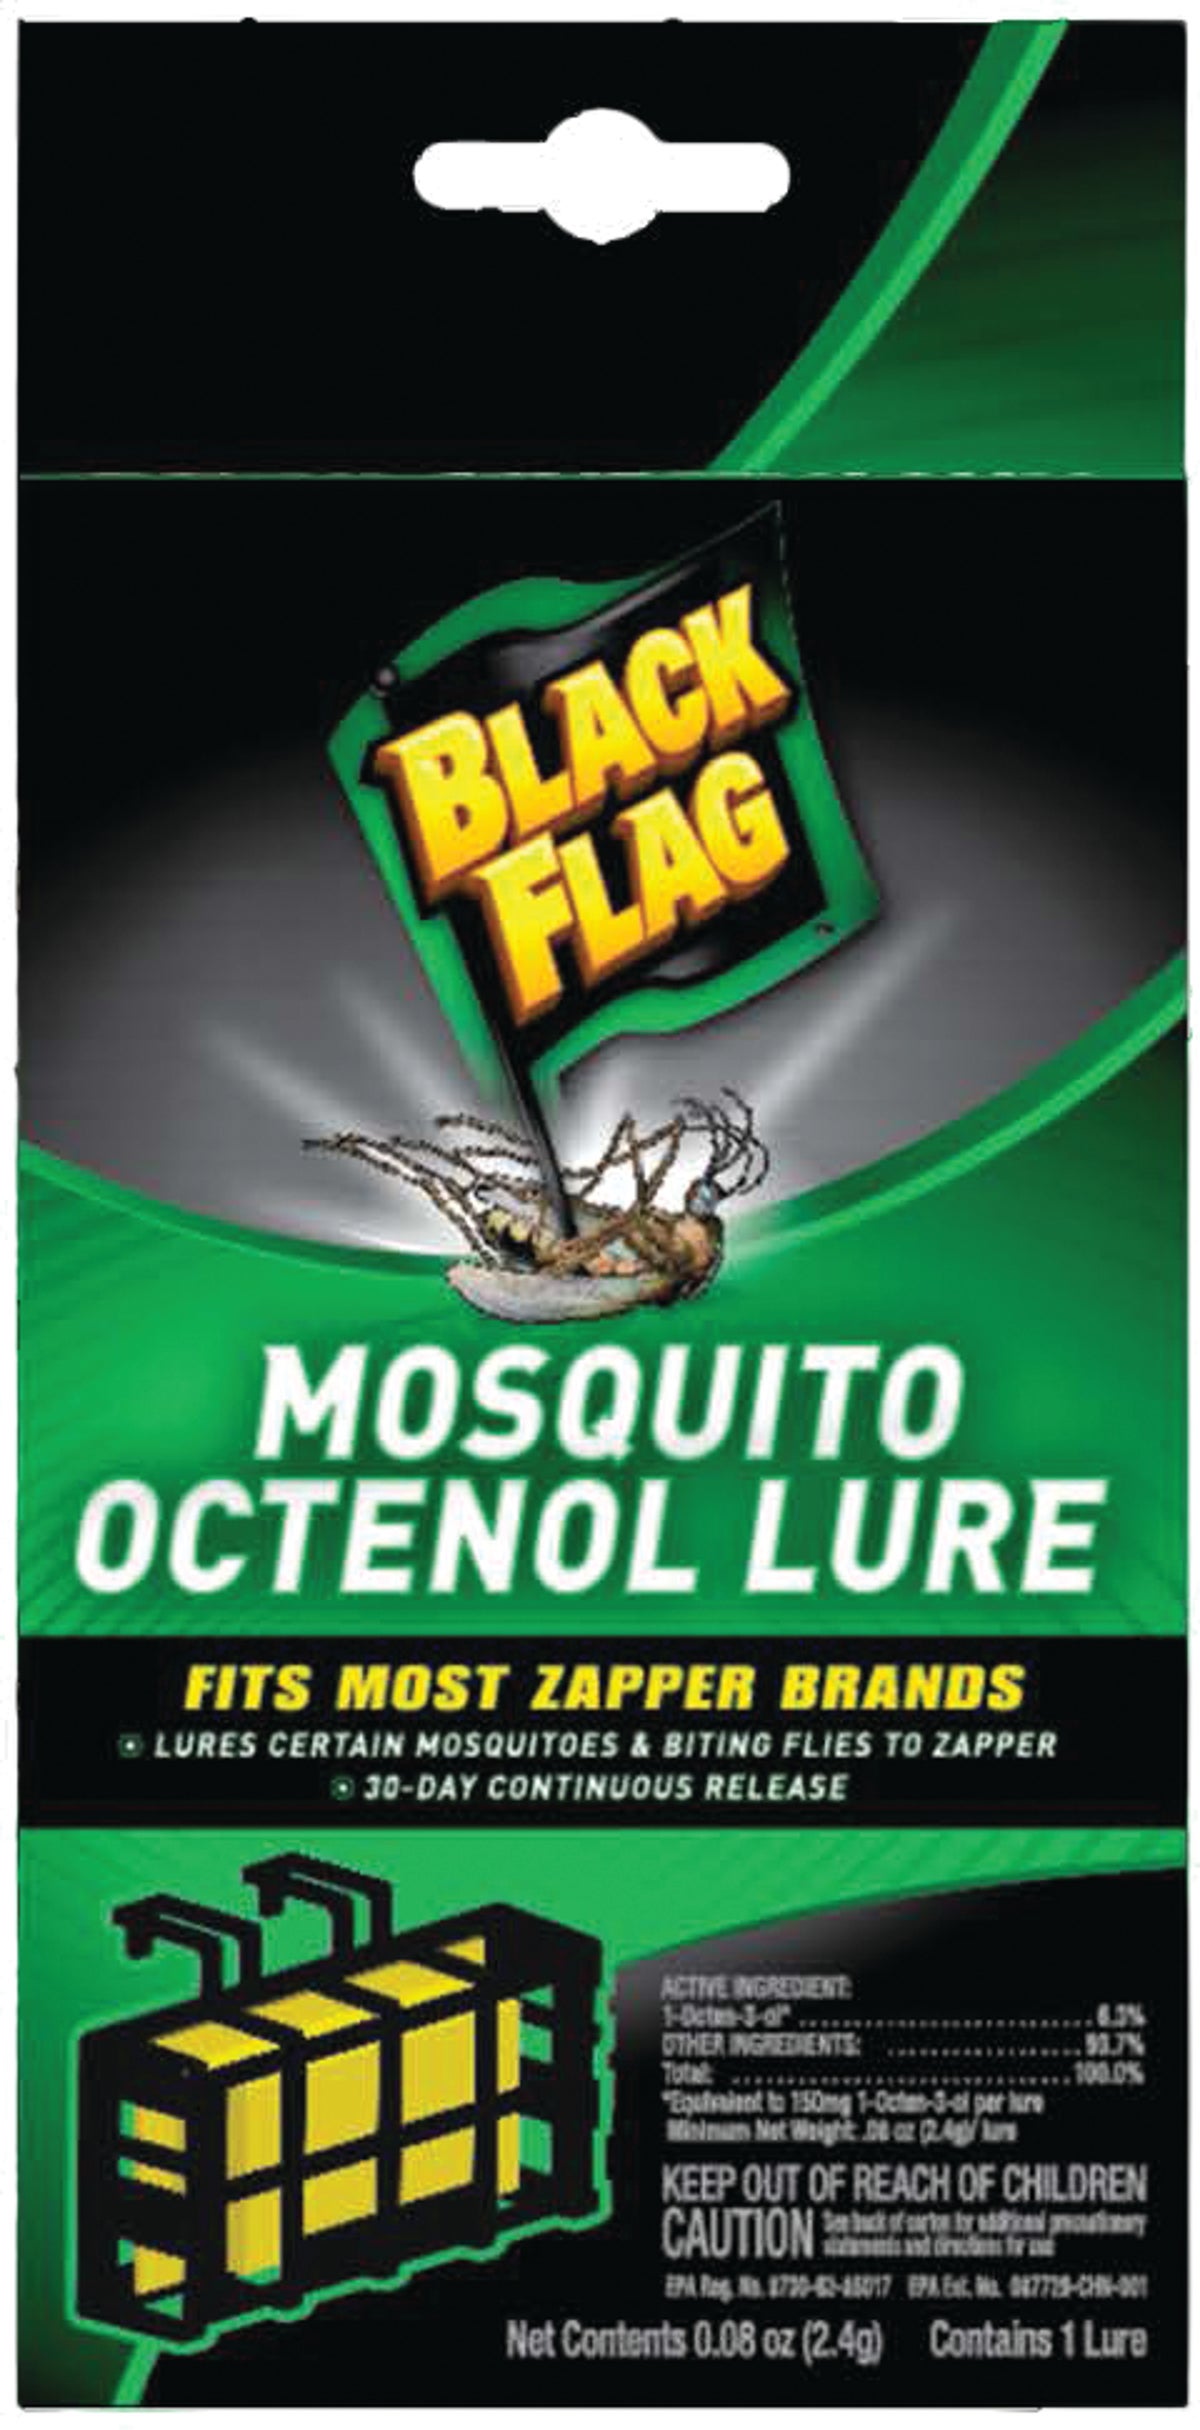 Pic Mosquito Octenol Lure (3 Pack), Attracts Mosquitoes, for Use with Electronic Insect Killers & Traps